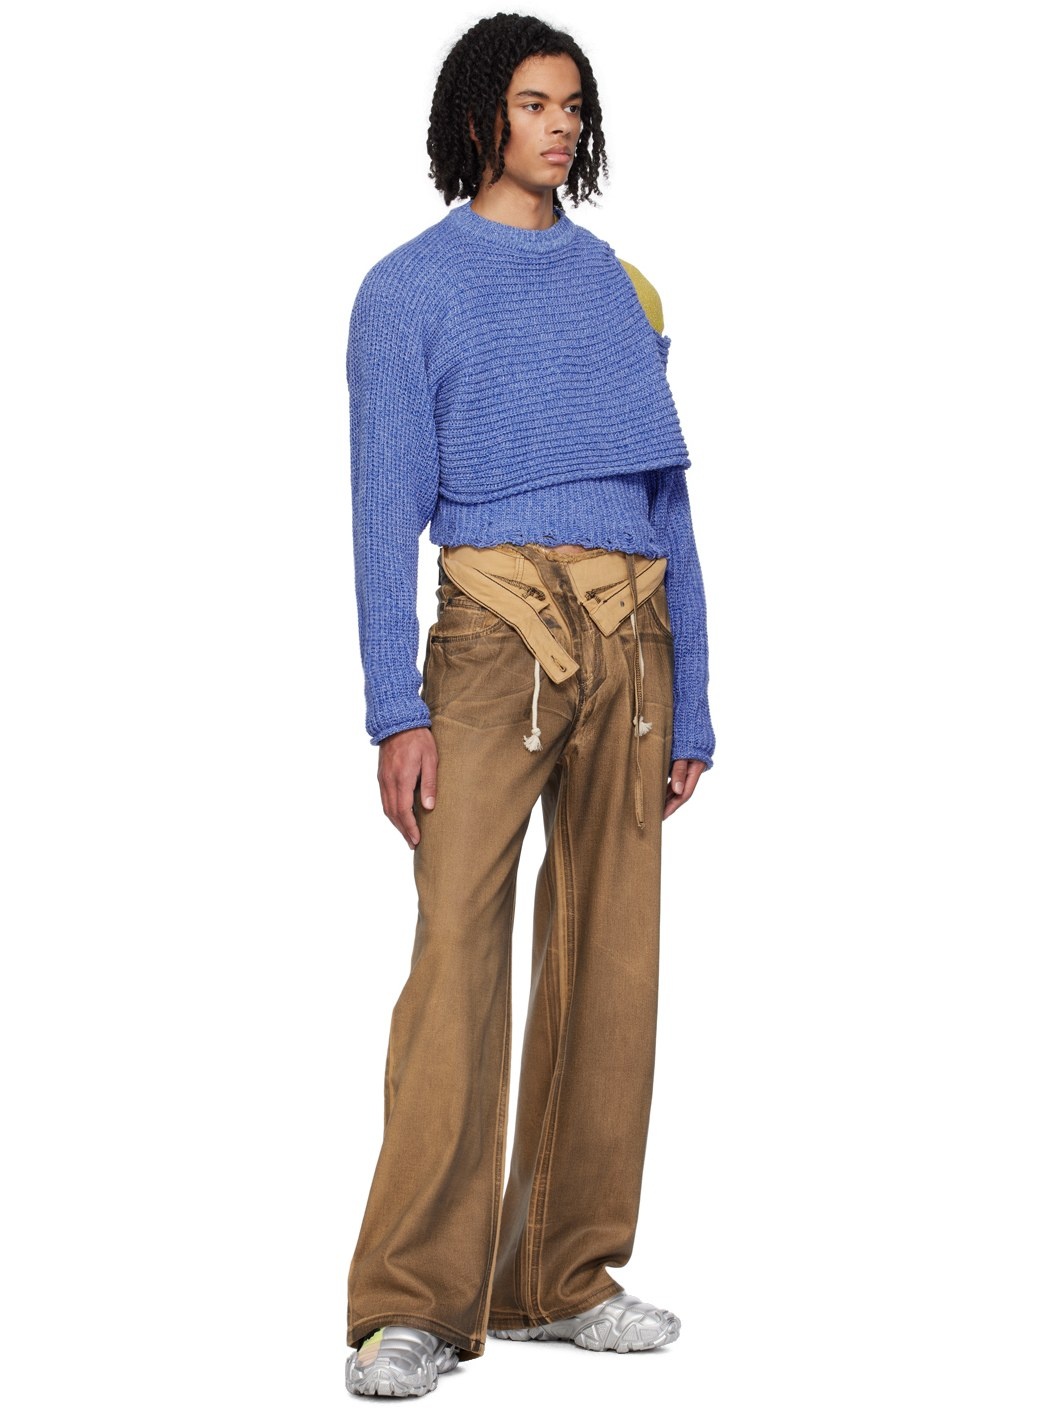 Blue Deconstructed Sweater - 4